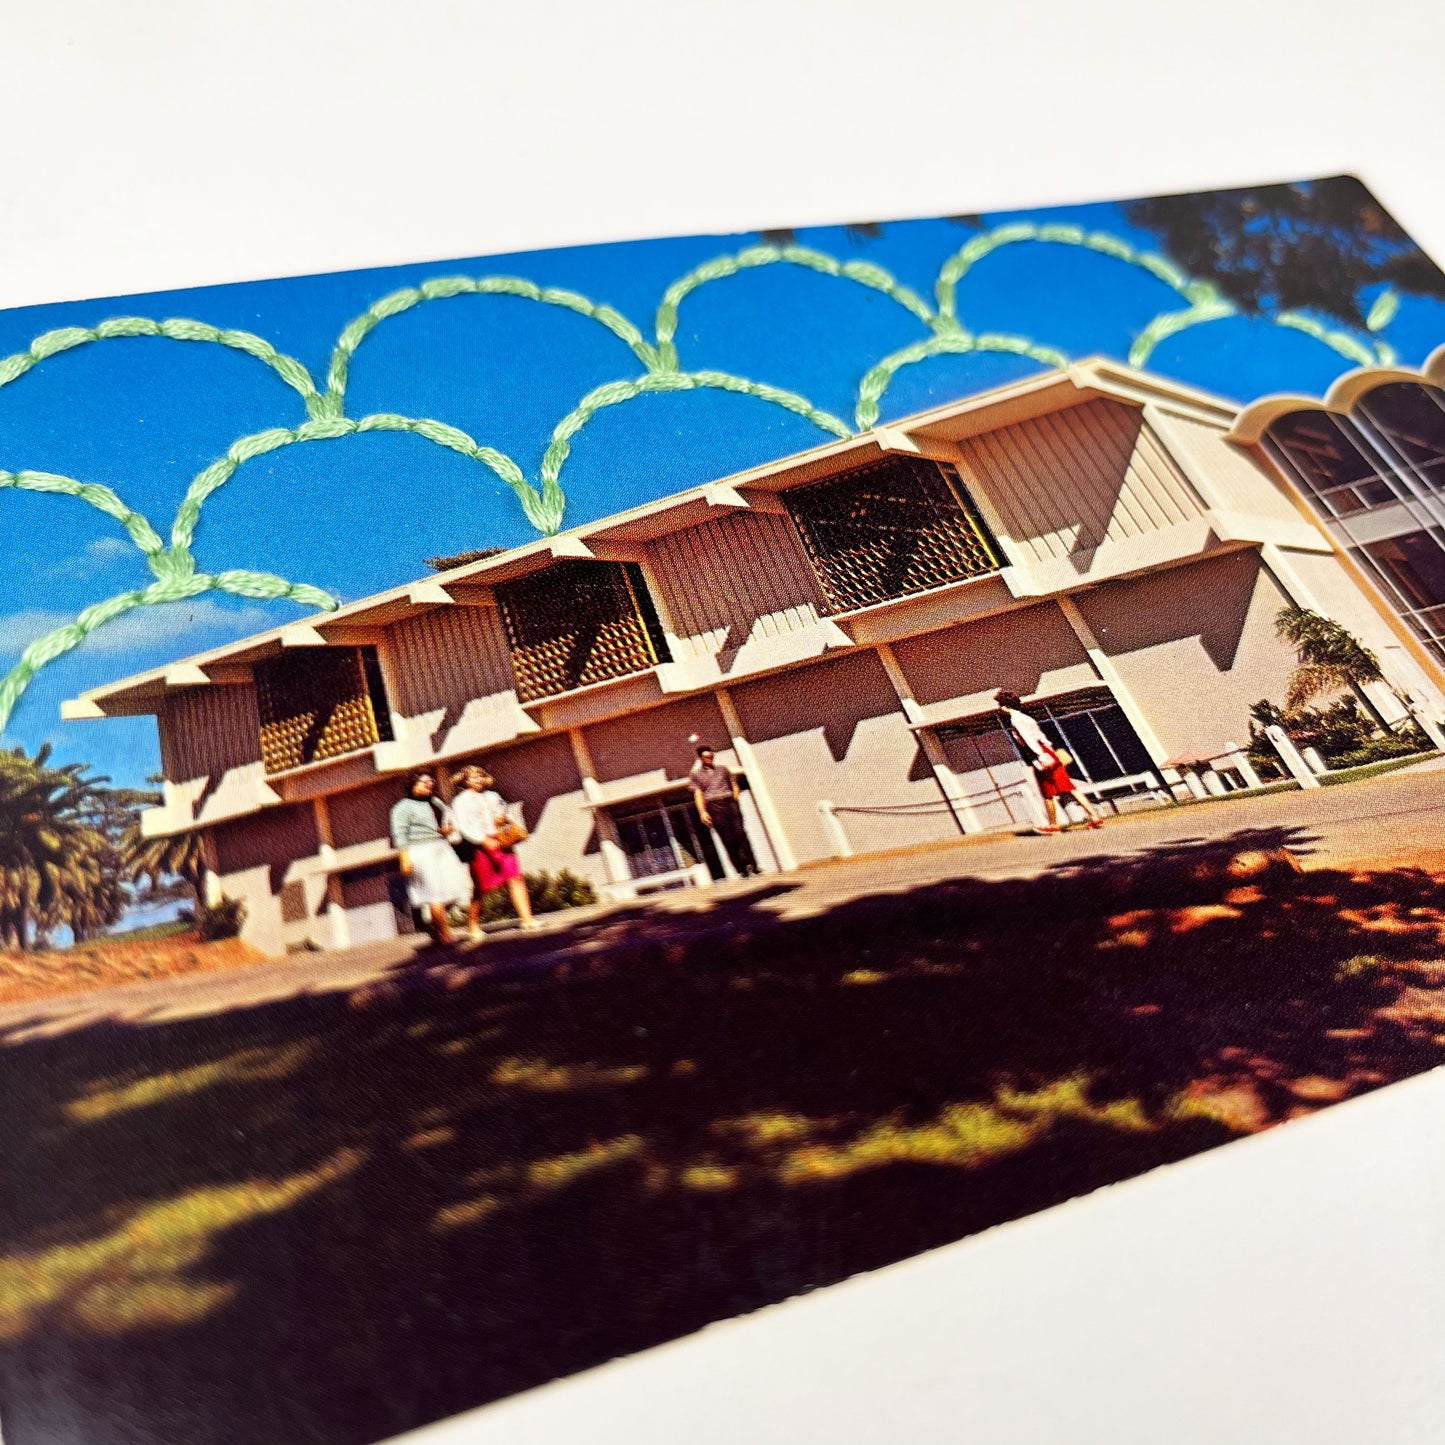 close up angled view of an old postcard of a building at a college in San Diego, with a hand embroidered overlapping circle design like scales in mint green stitched in the background on the sky only, the postcard is sitting on a white background